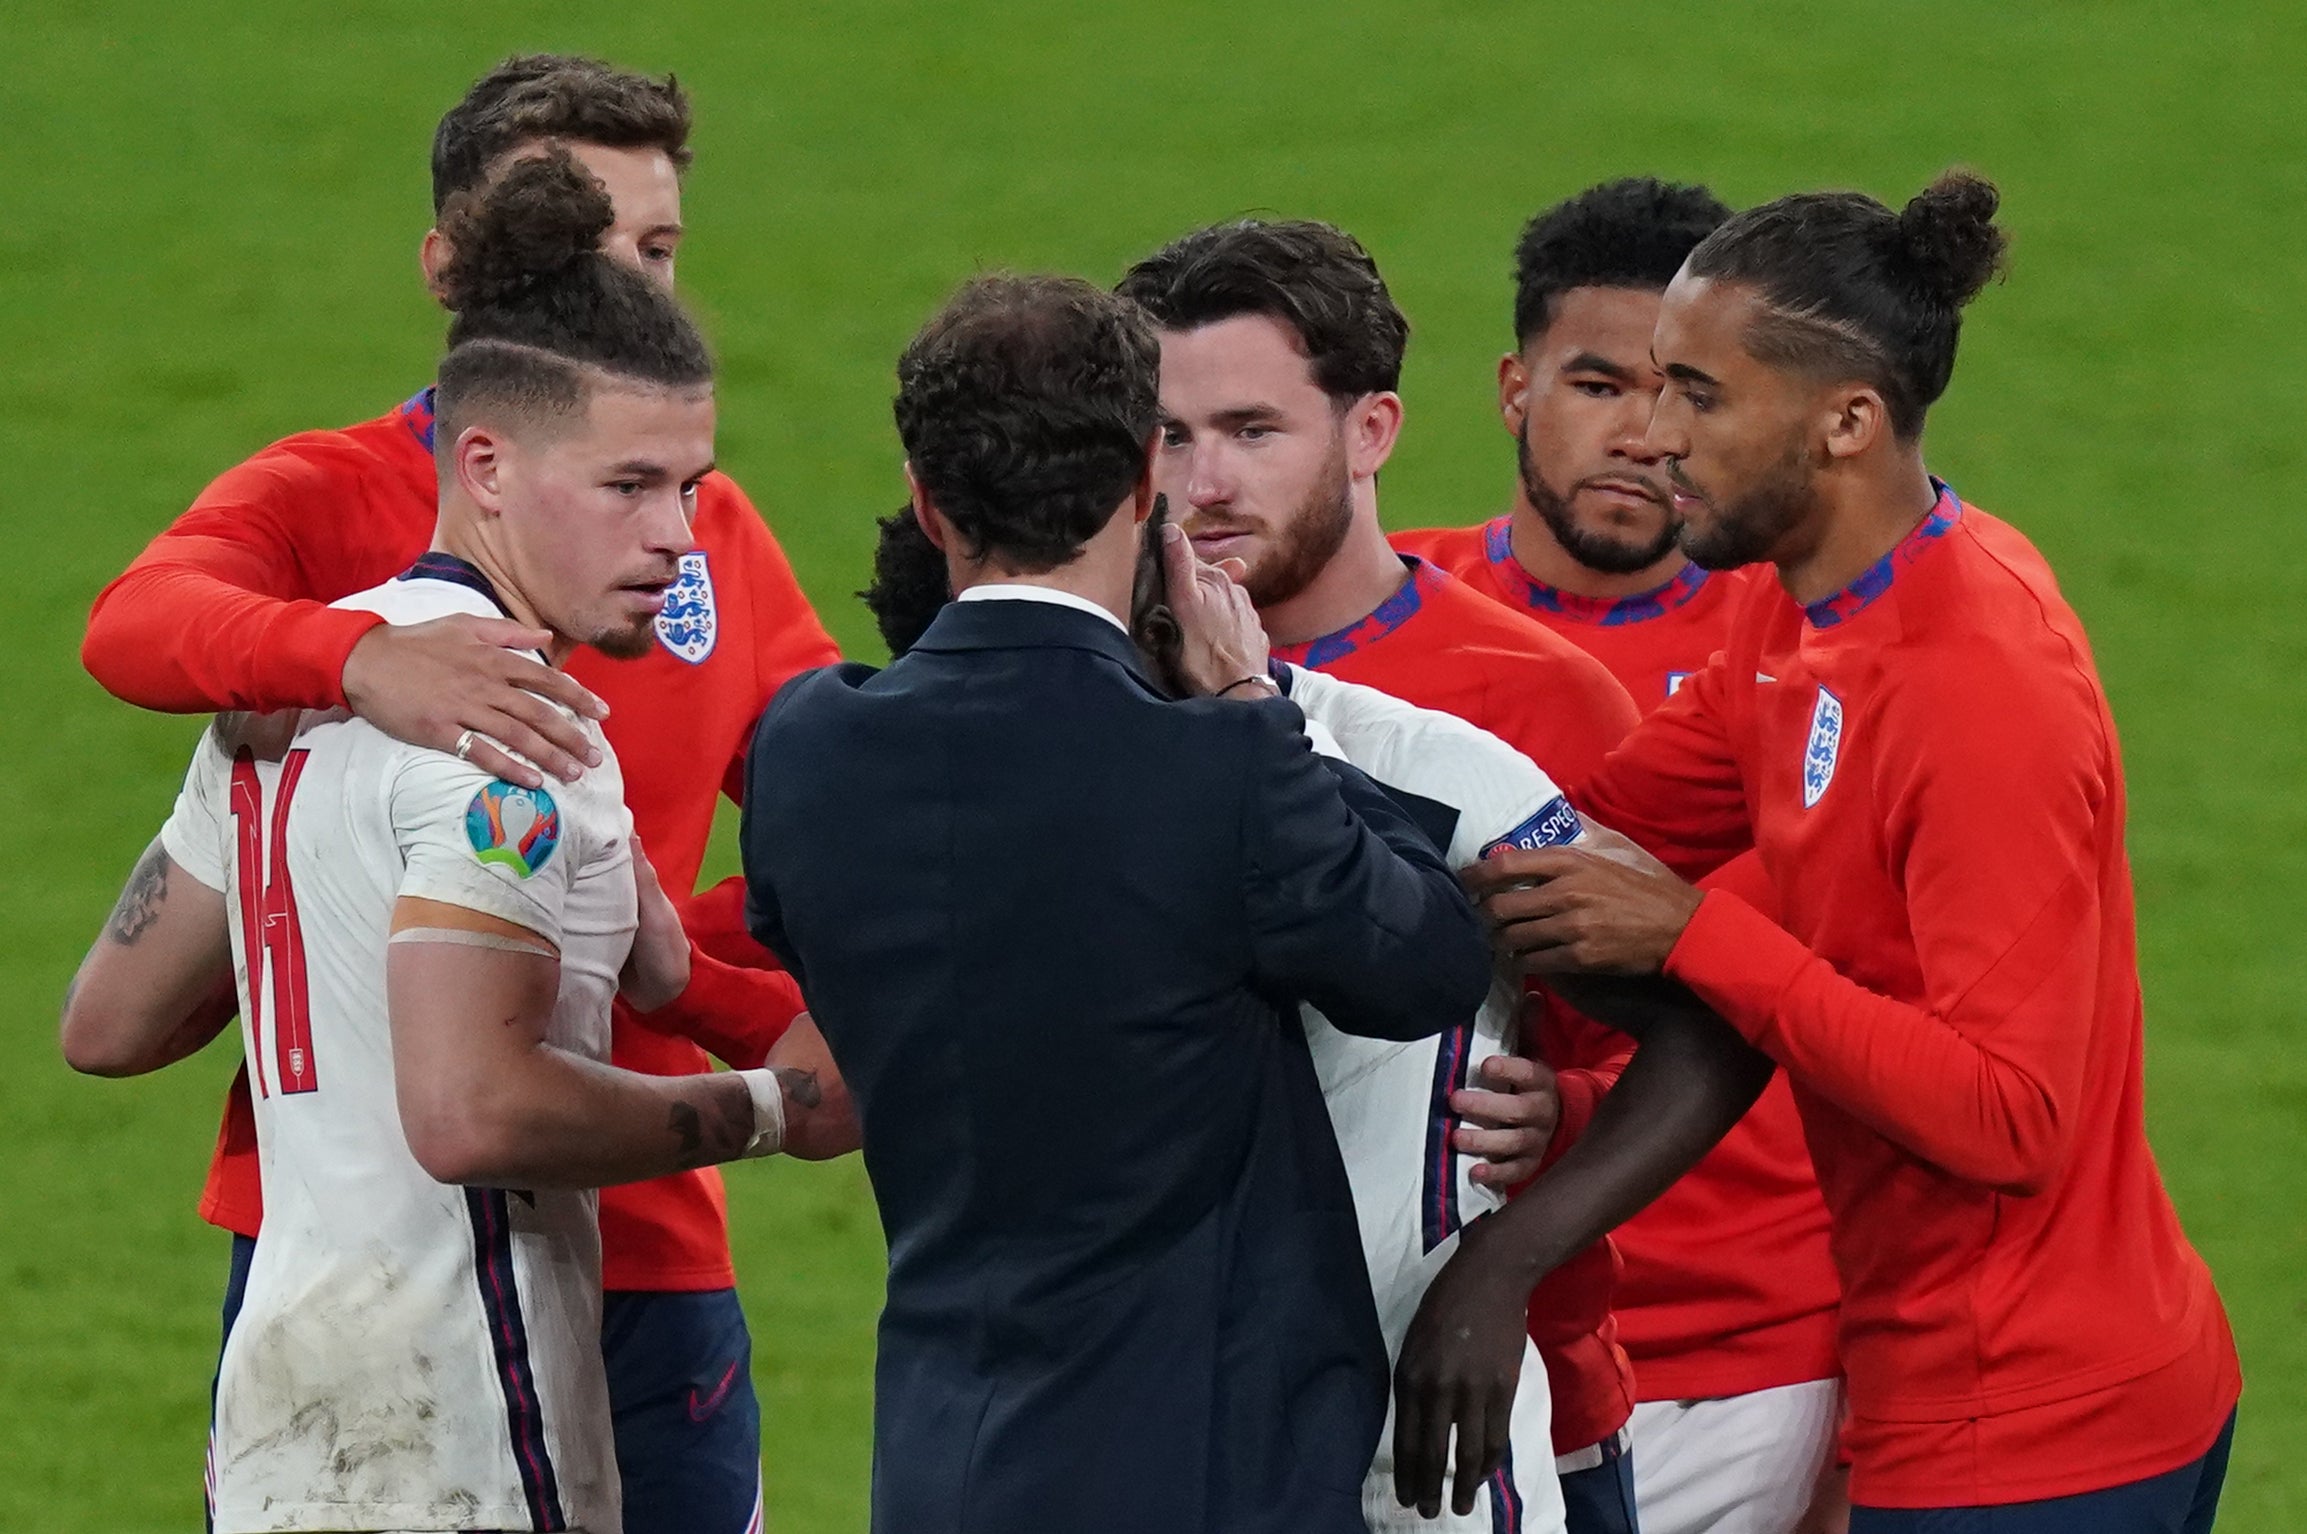 England’s Bukayo Saka is consoled by manager Gareth Southgate after missing during the penalty shoot out against Italy in the Euro 2020 final at Wembley.